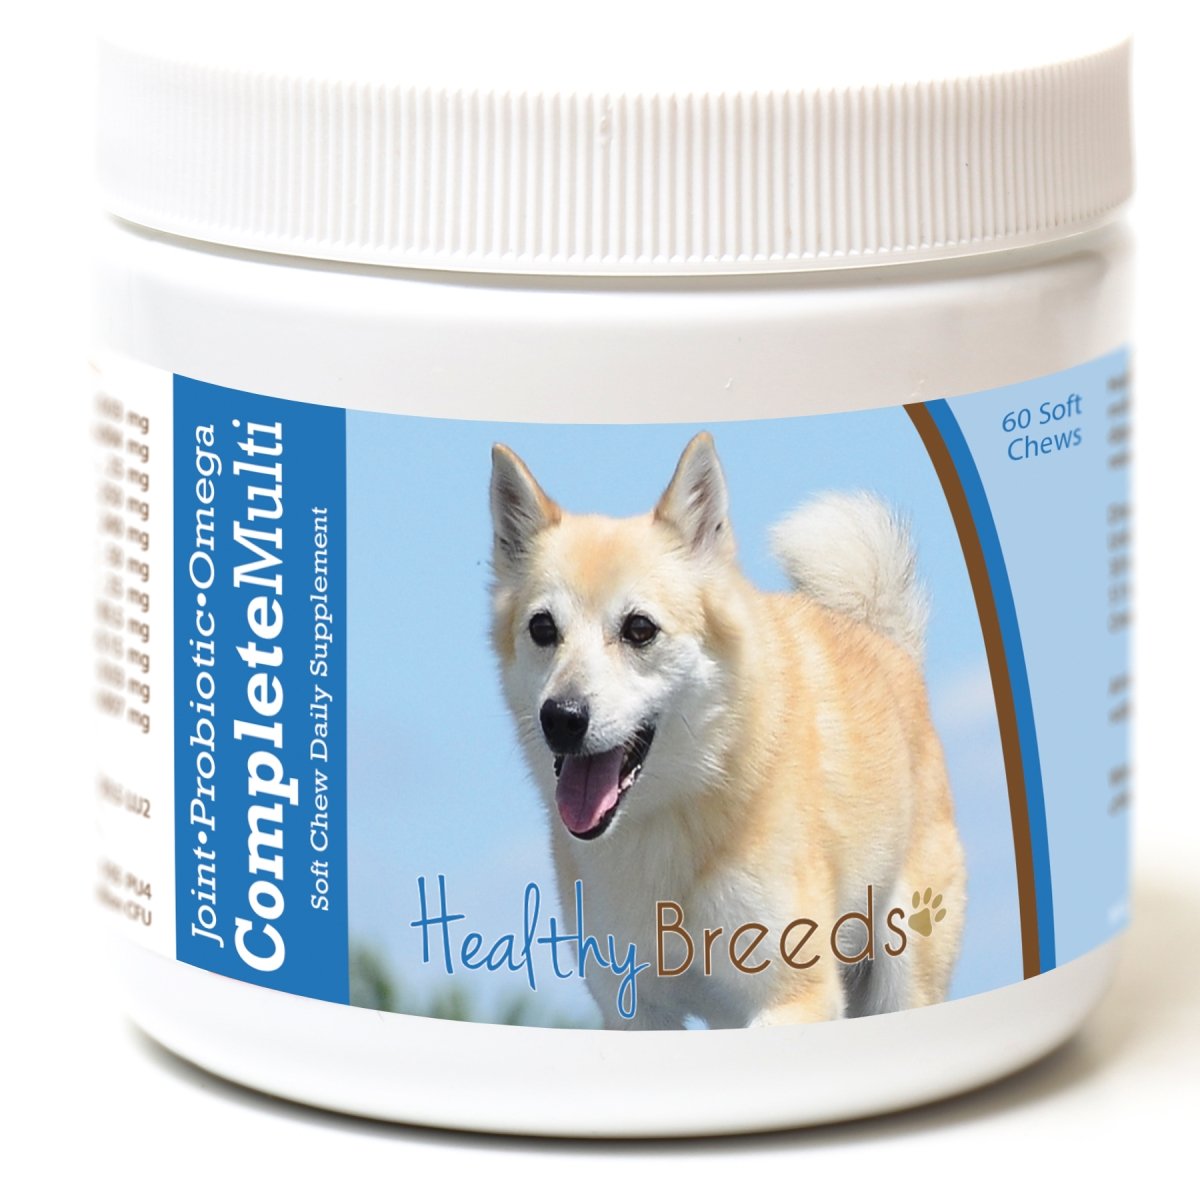 Picture of Healthy Breeds 192959008548 Norwegian Buhund All in One Multivitamin Soft Chew - 60 Count